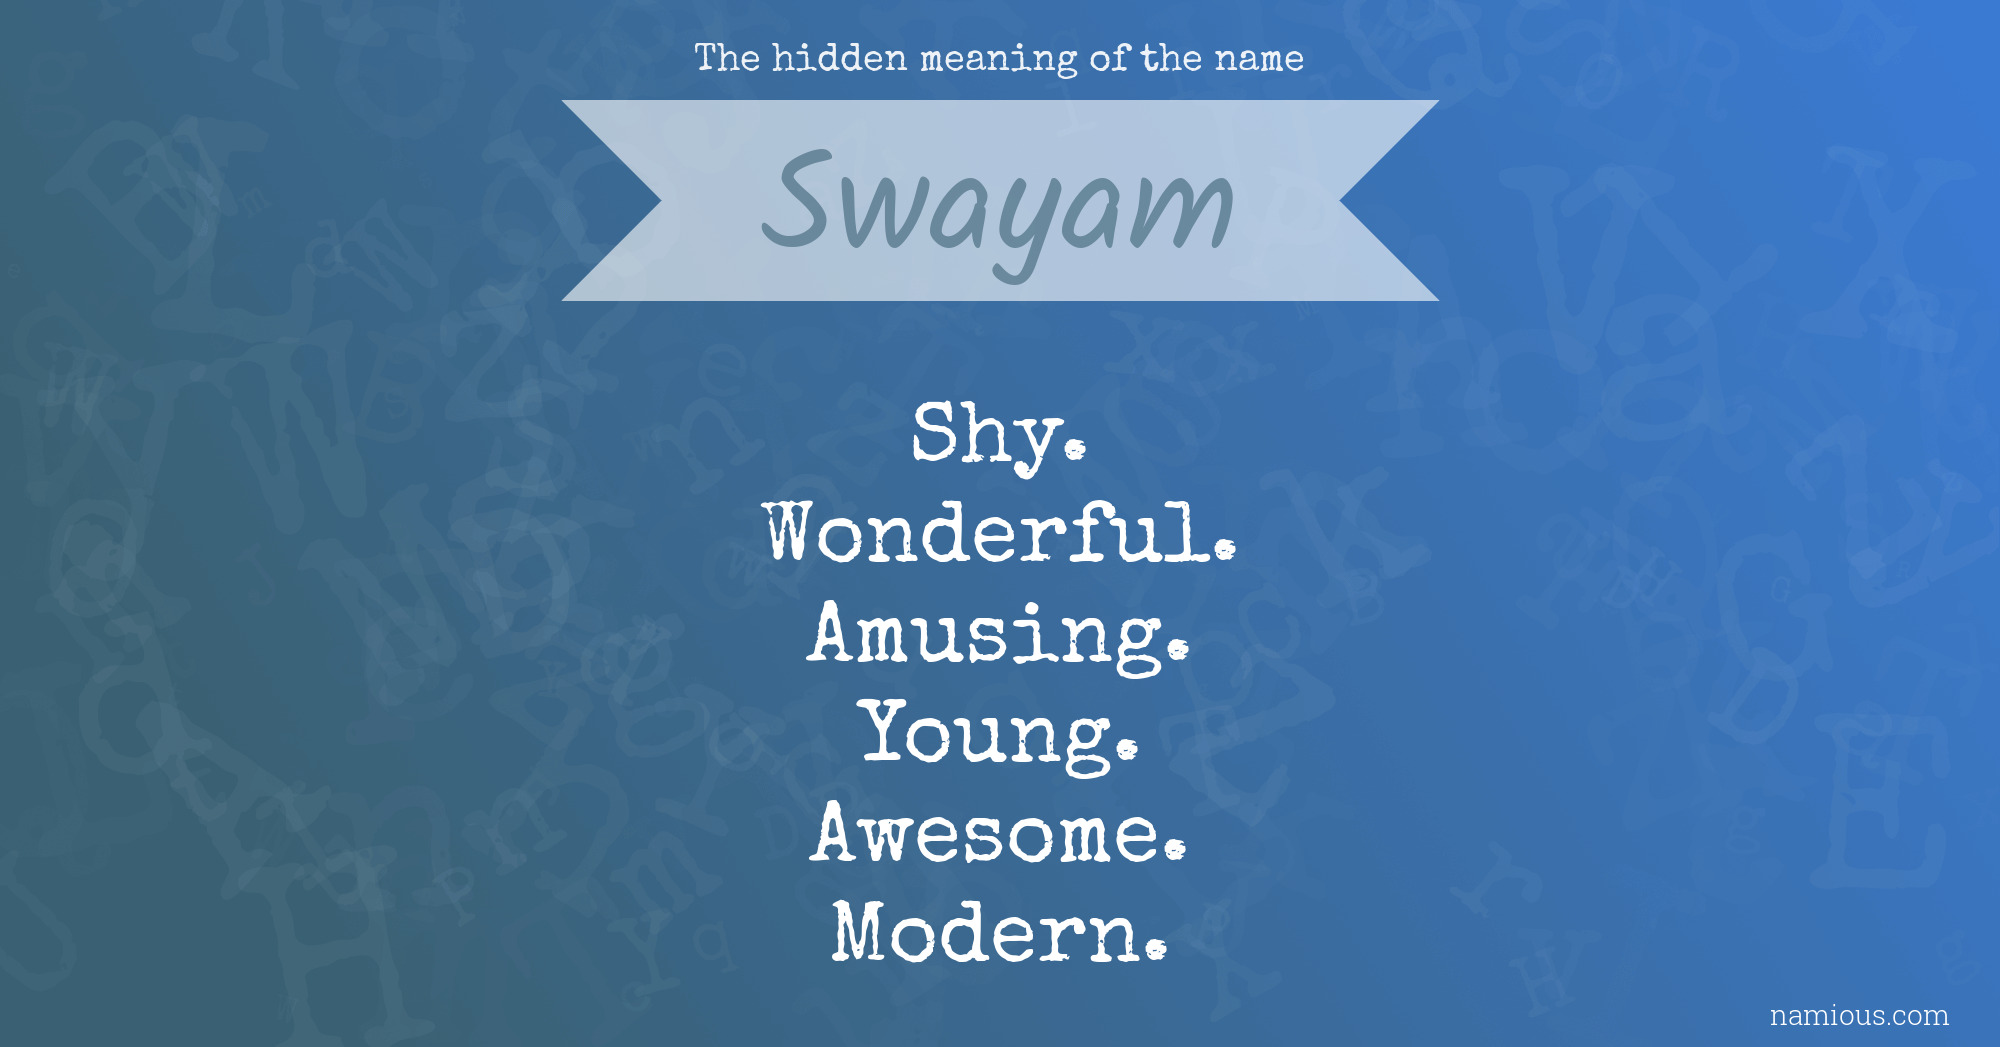 The hidden meaning of the name Swayam